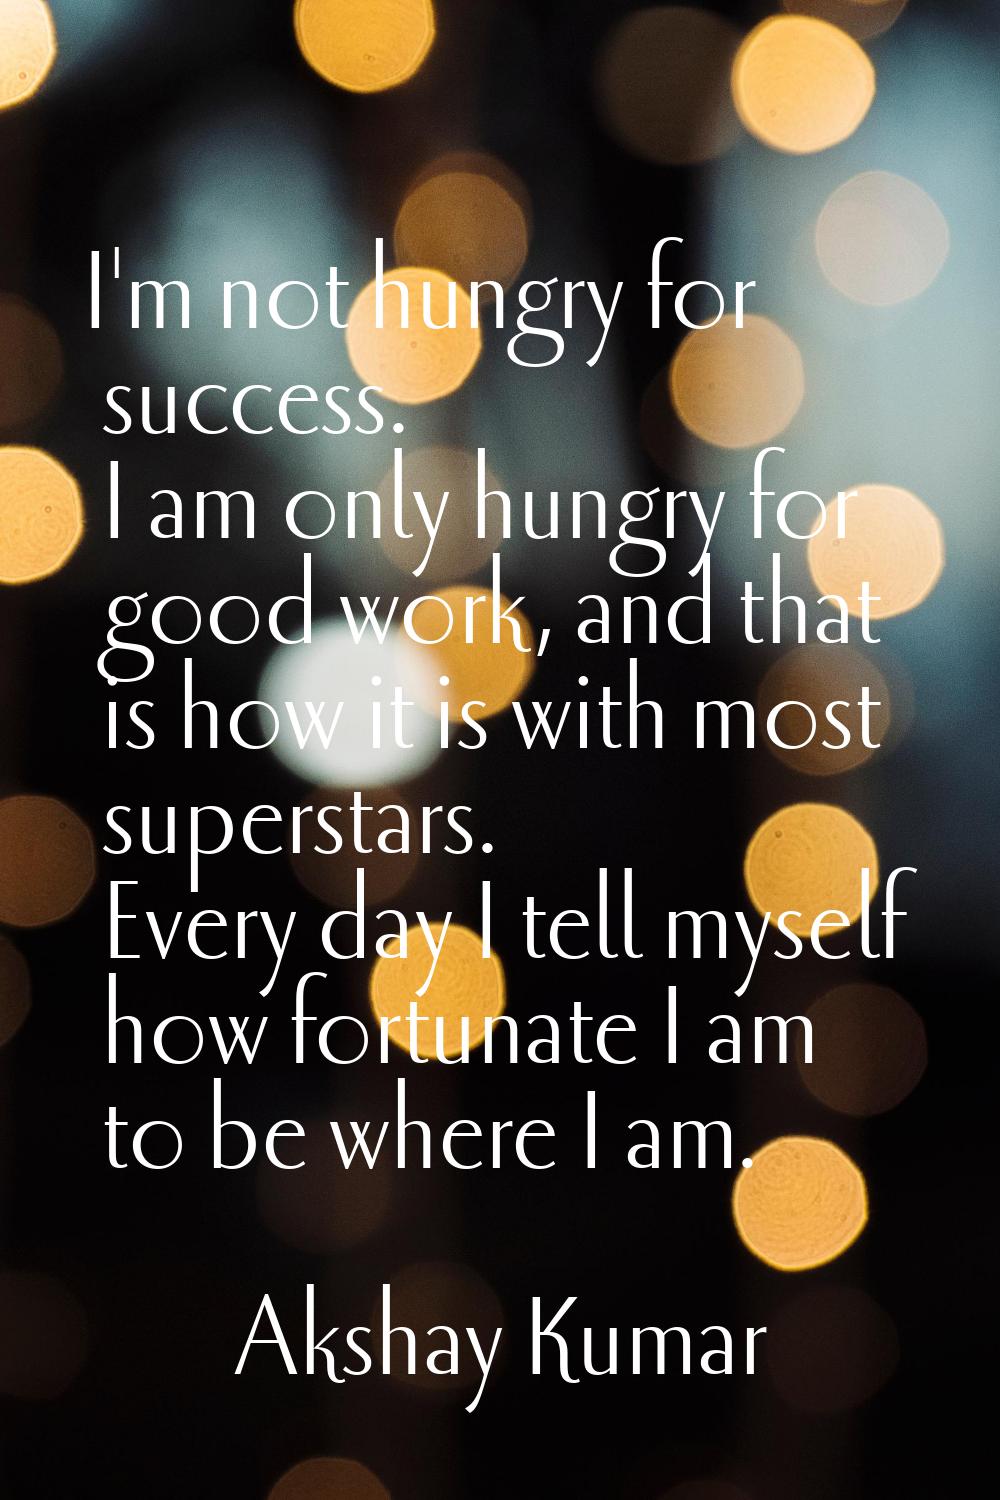 I'm not hungry for success. I am only hungry for good work, and that is how it is with most superst